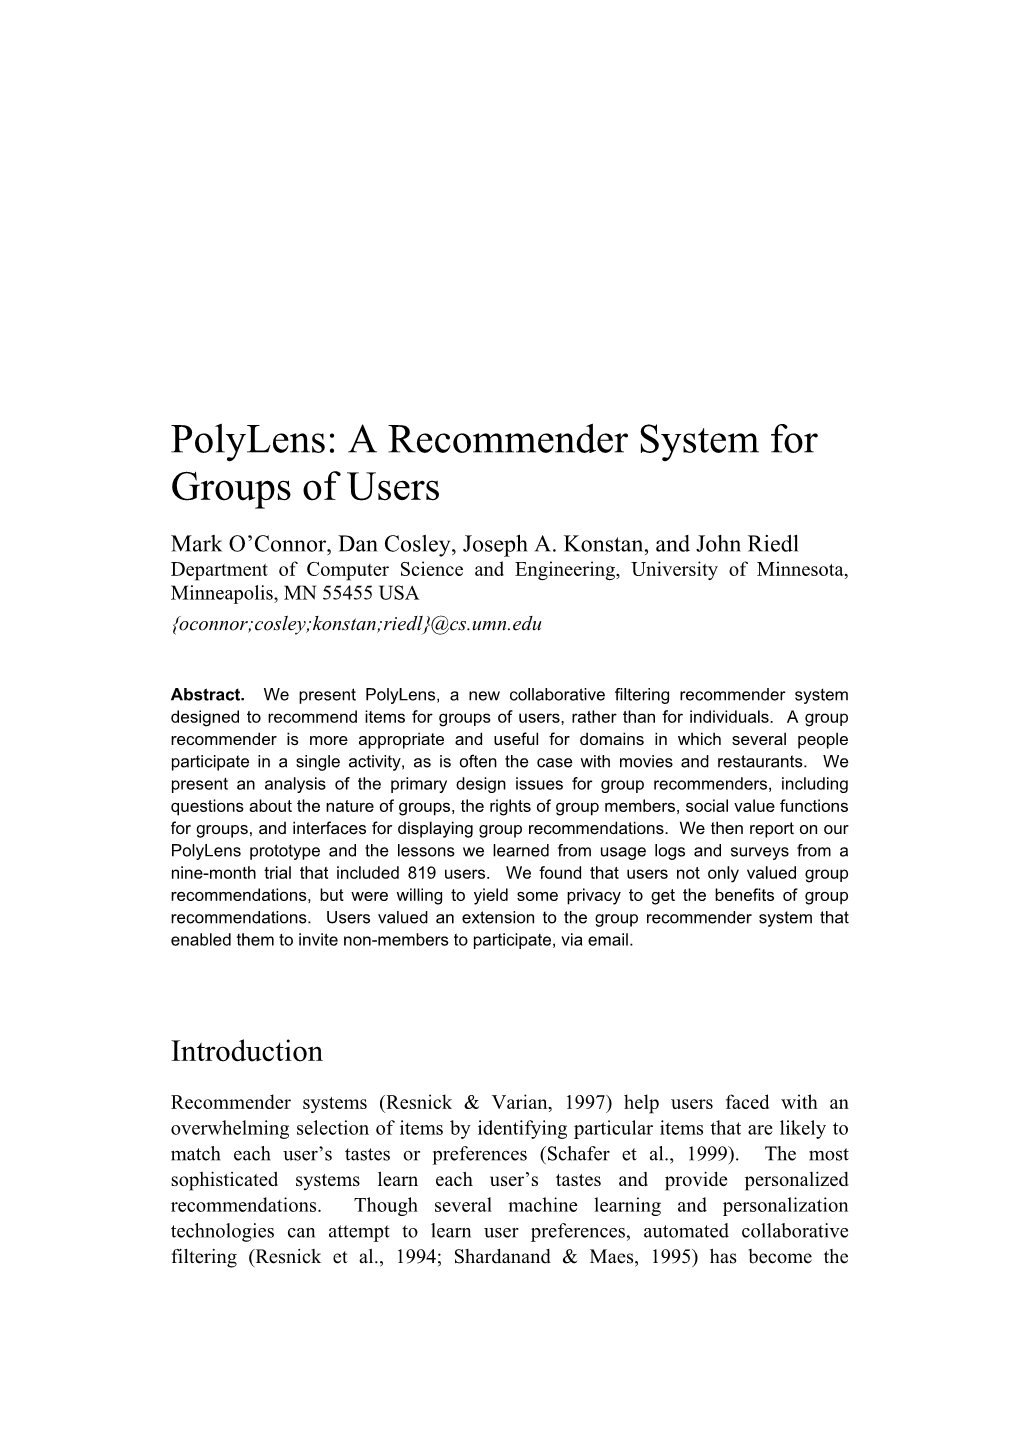 A Recommender System for Groups of Users